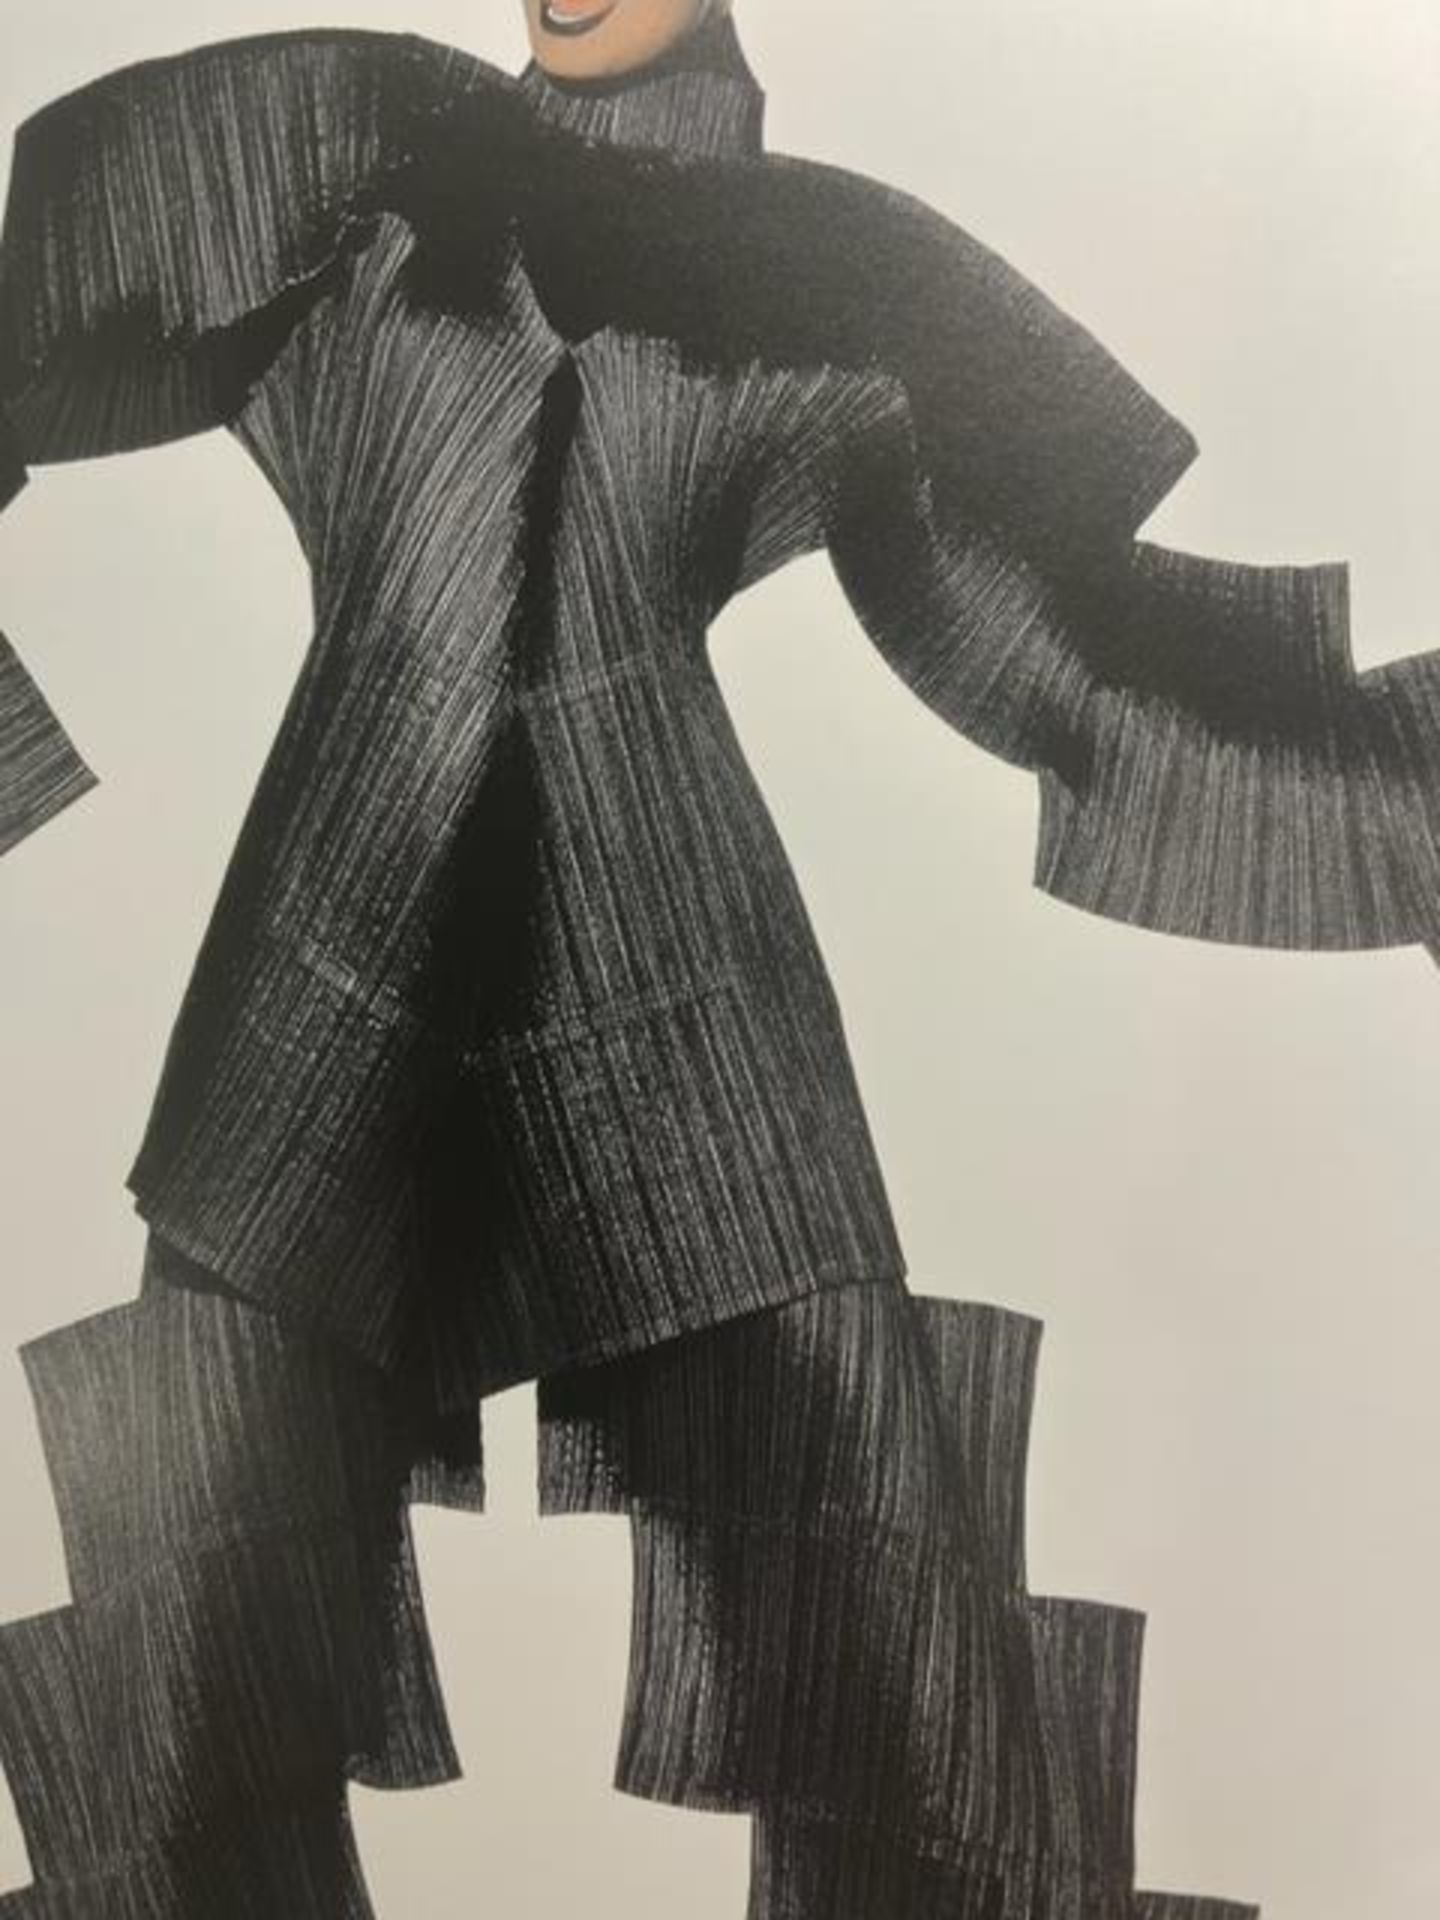 Irving Penn "Staircase Pleats" Print. - Image 6 of 6